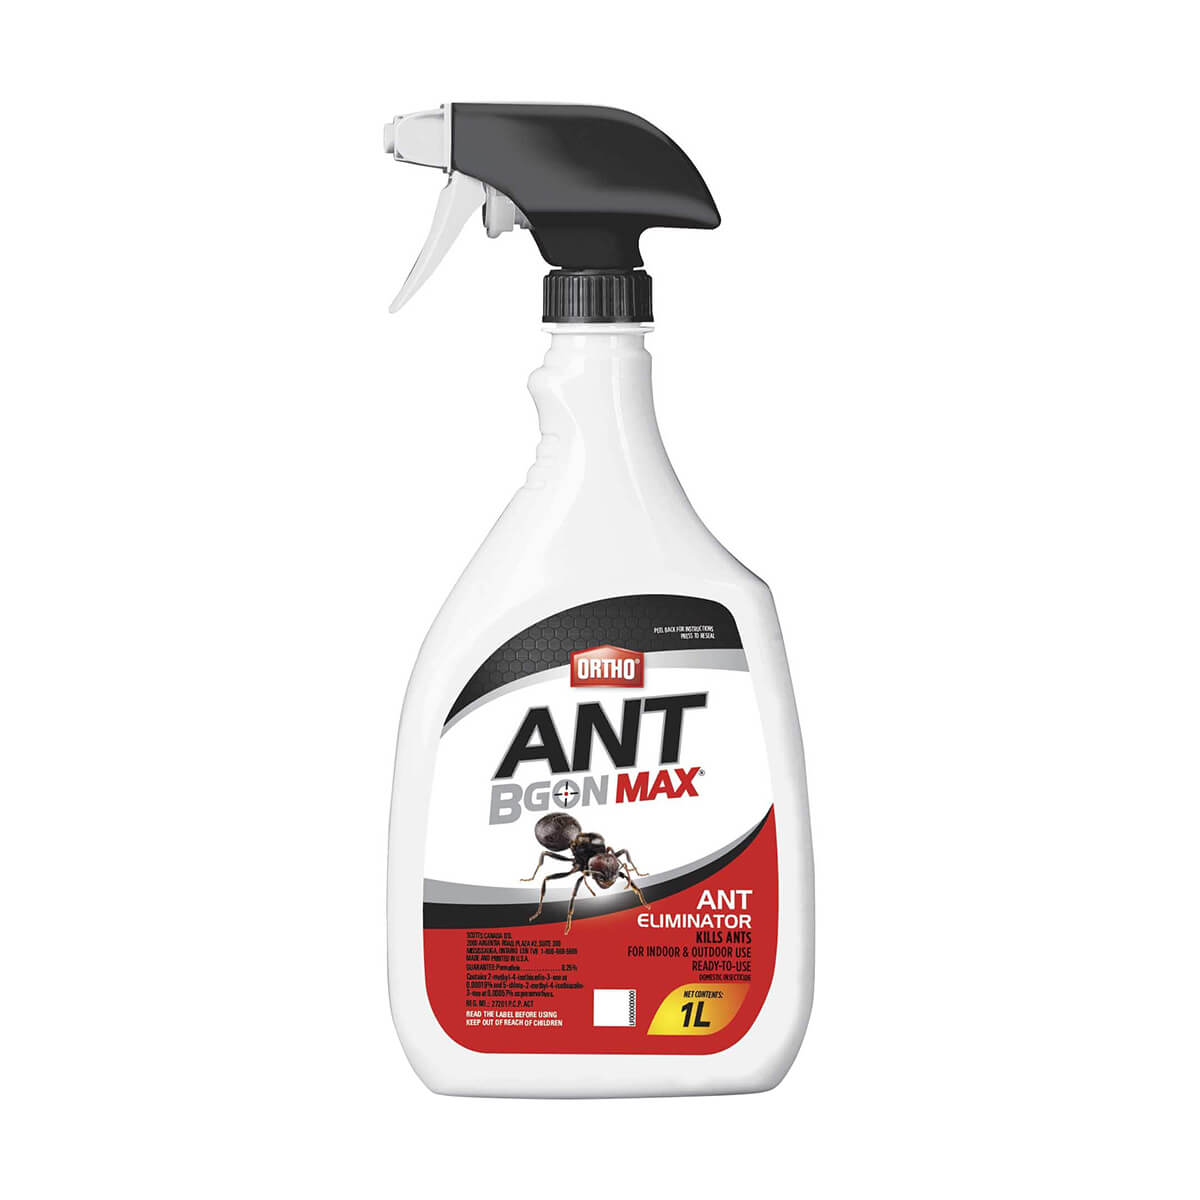 Ortho® Ant B Gon™ Max Ready-To-Use Ant Eliminator - 1 L